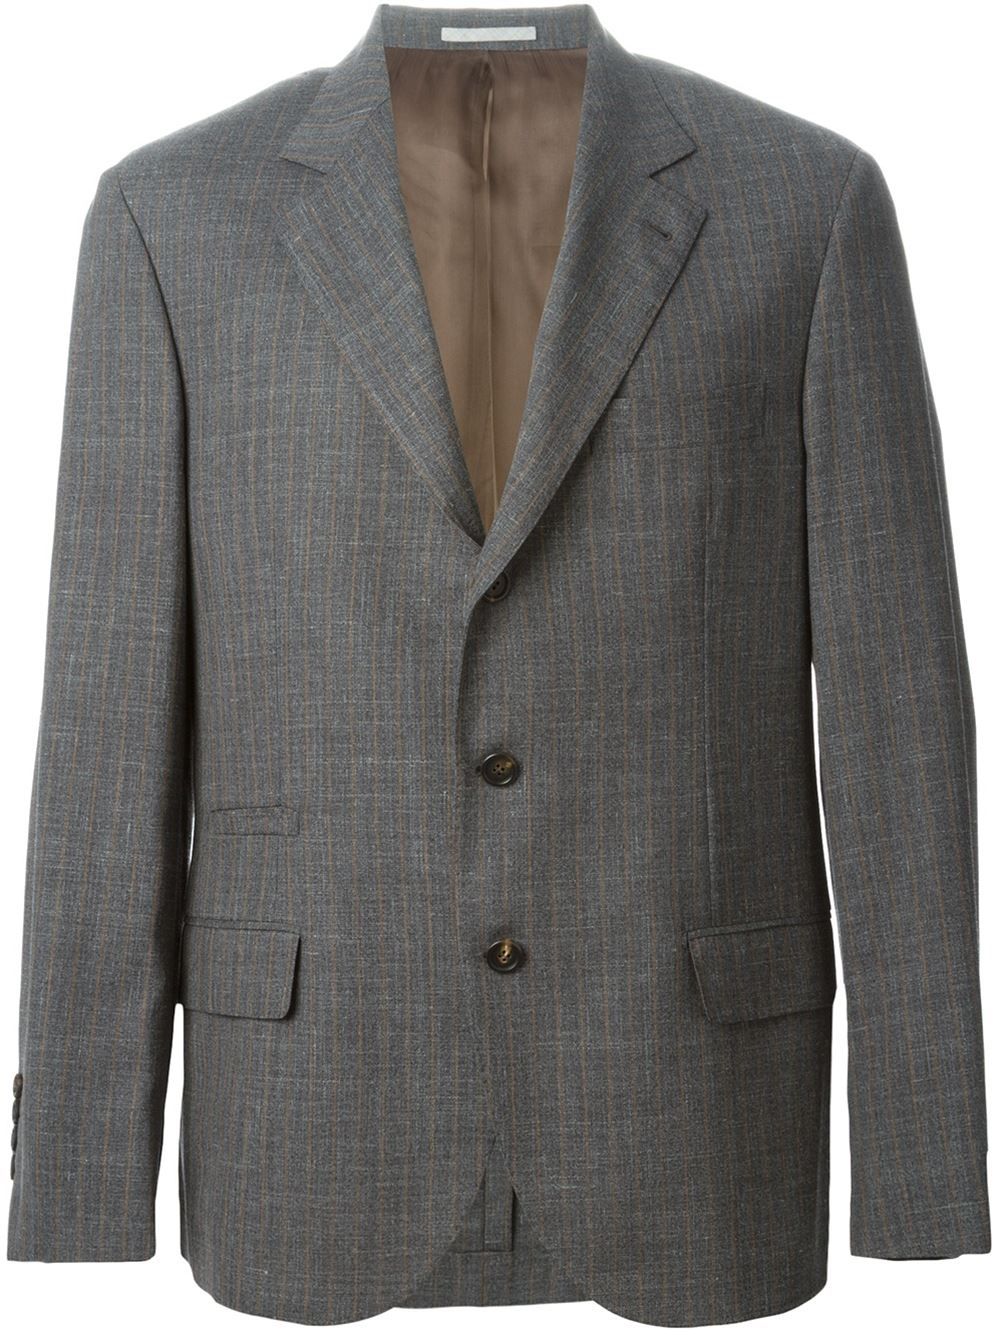 Brunello cucinelli Check Print Suit in Gray for Men | Lyst